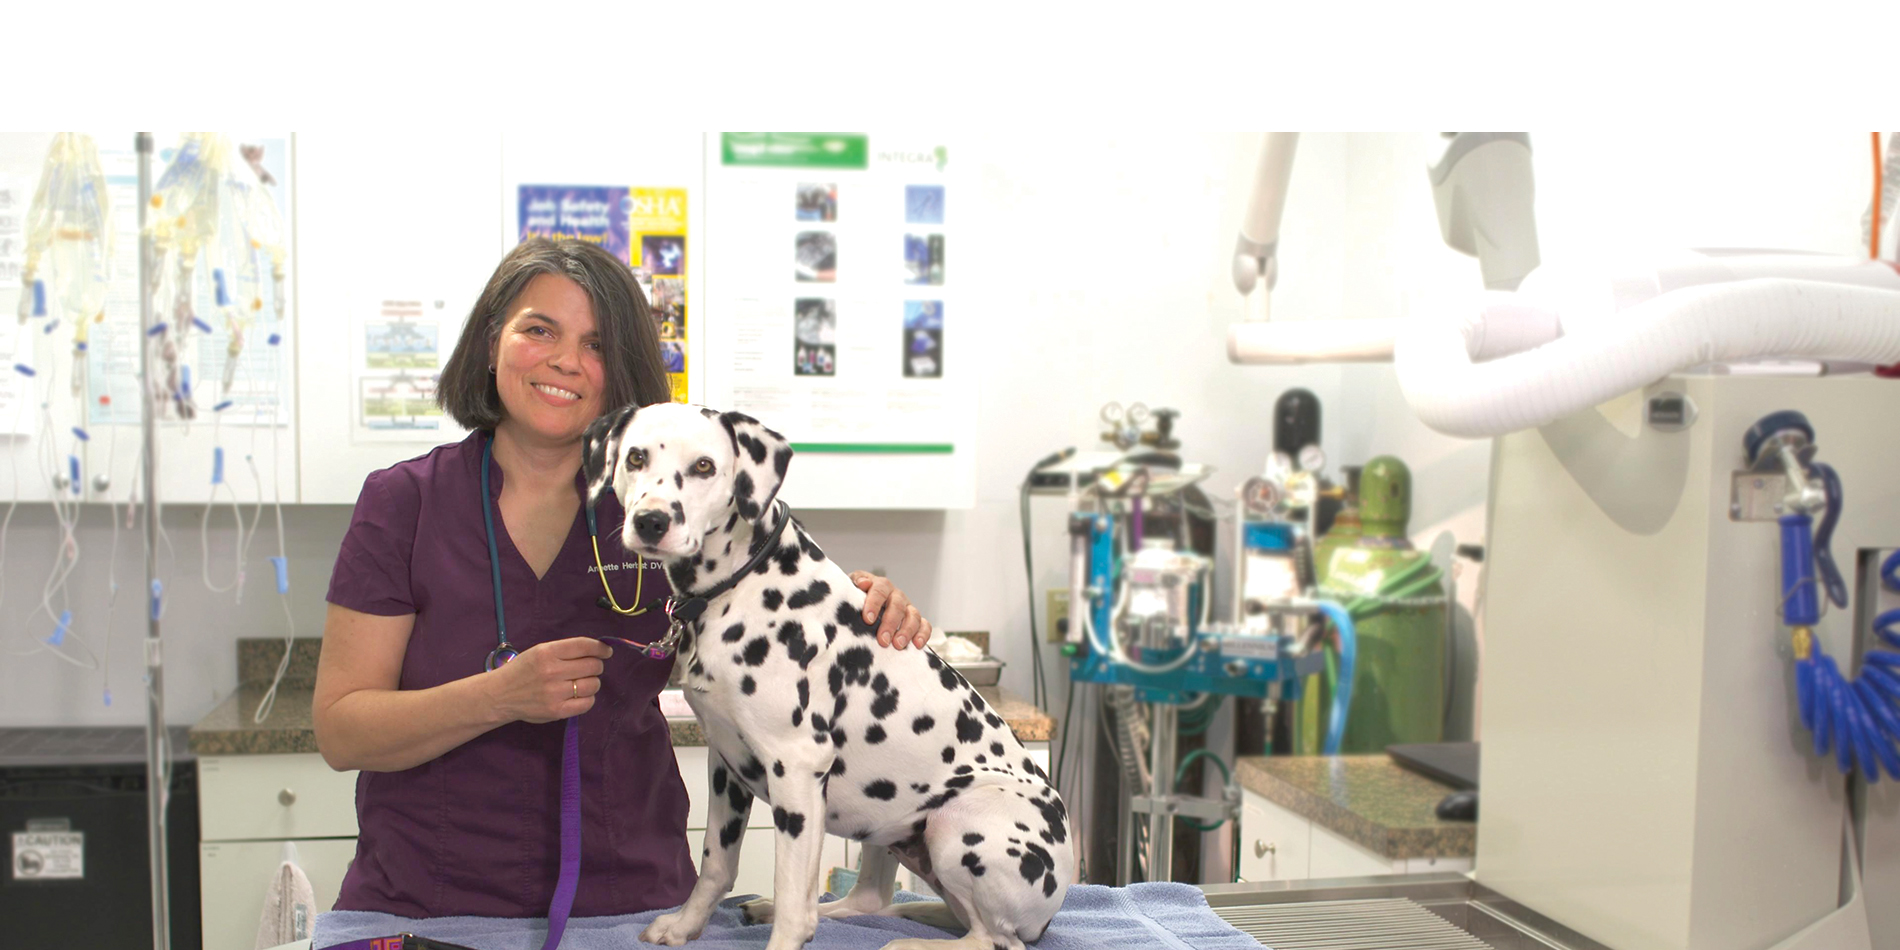 Dr. Annette Herbst, owner of All Pets Medical Center in Buzzards Bay, poses with Dalmation patient in exam room